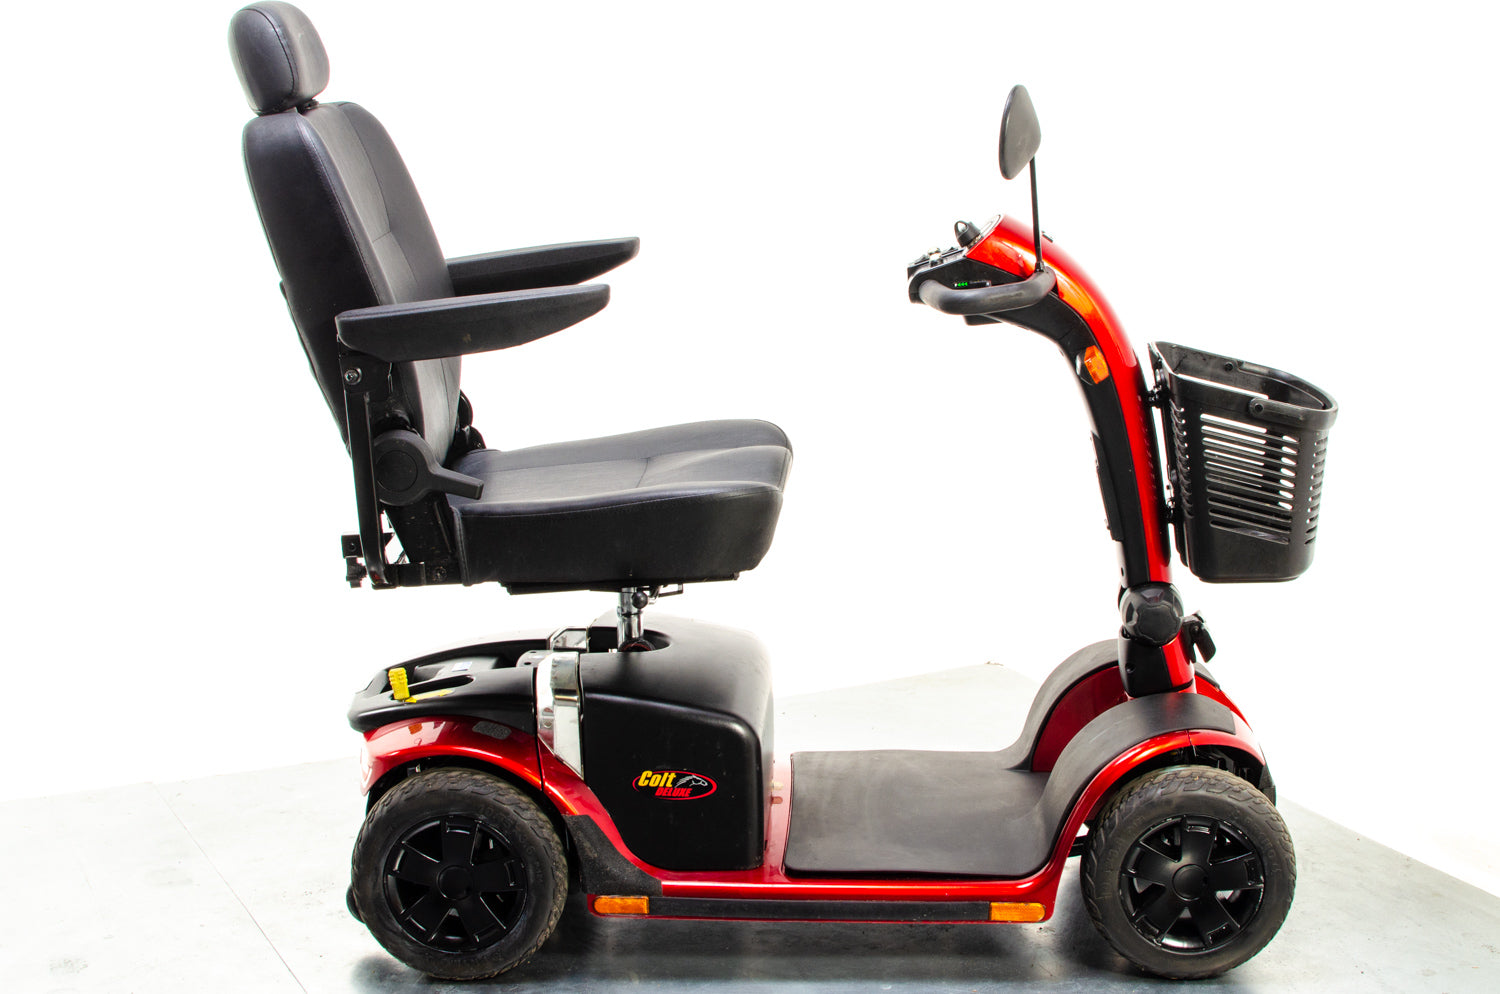 Pride Colt Deluxe Used Electric Mobility Scooter 6mph Transportable Road Pavement Green Seat Post Suspension Solid Tyres Red 13310